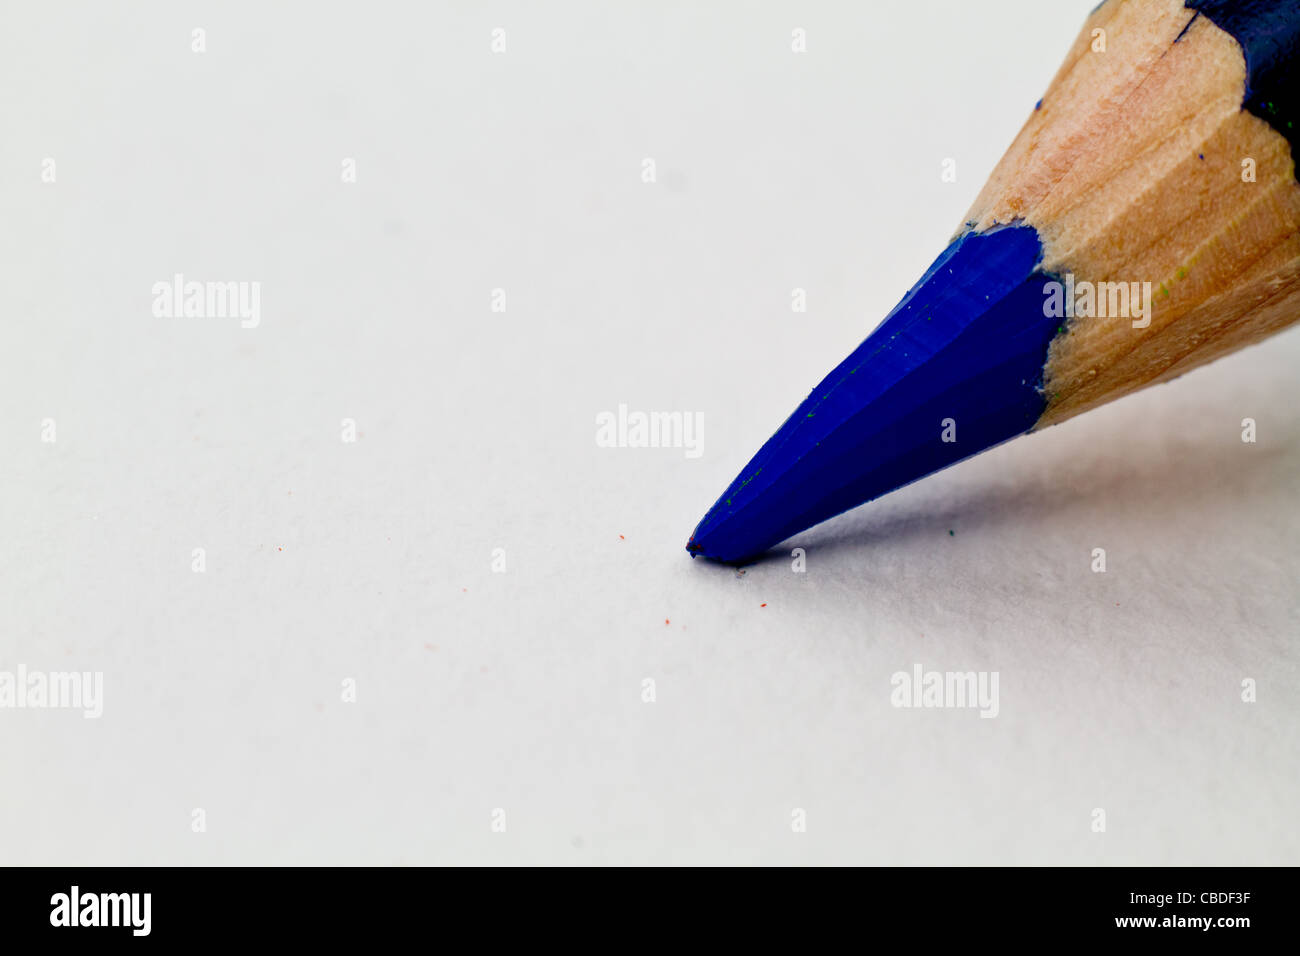 Close up of a Blue water soluble pencil tip. Stock Photo